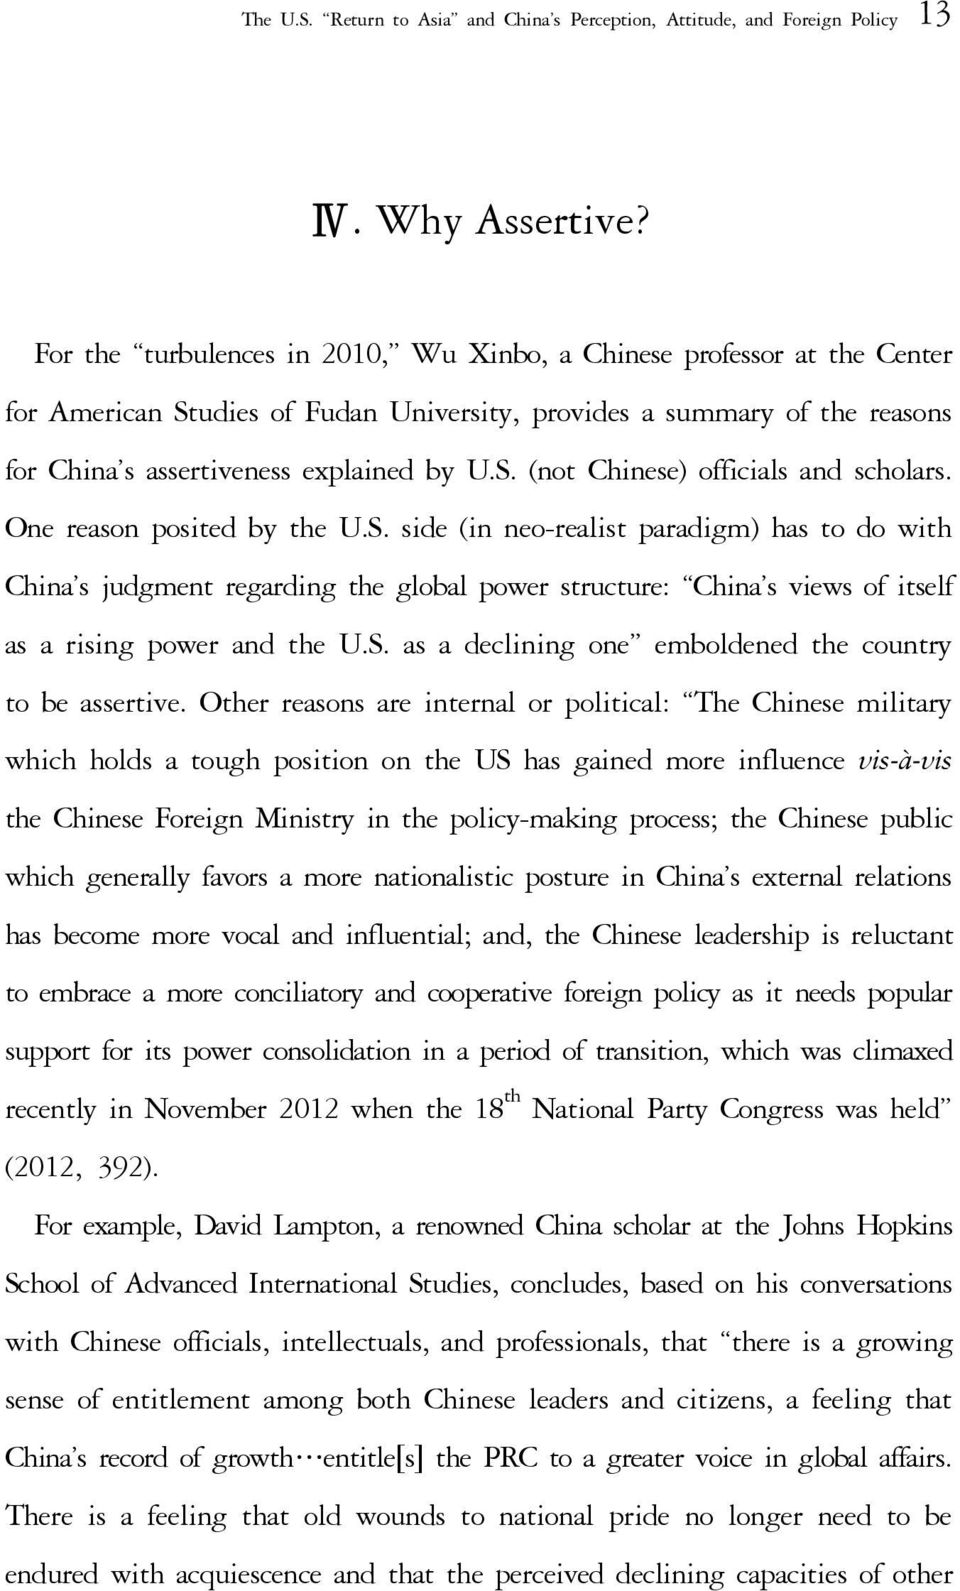 One reason posited by the U.S. side (in neo-realist paradigm) has to do with China s judgment regarding the global power structure: China s views of itself as a rising power and the U.S. as a declining one emboldened the country to be assertive.